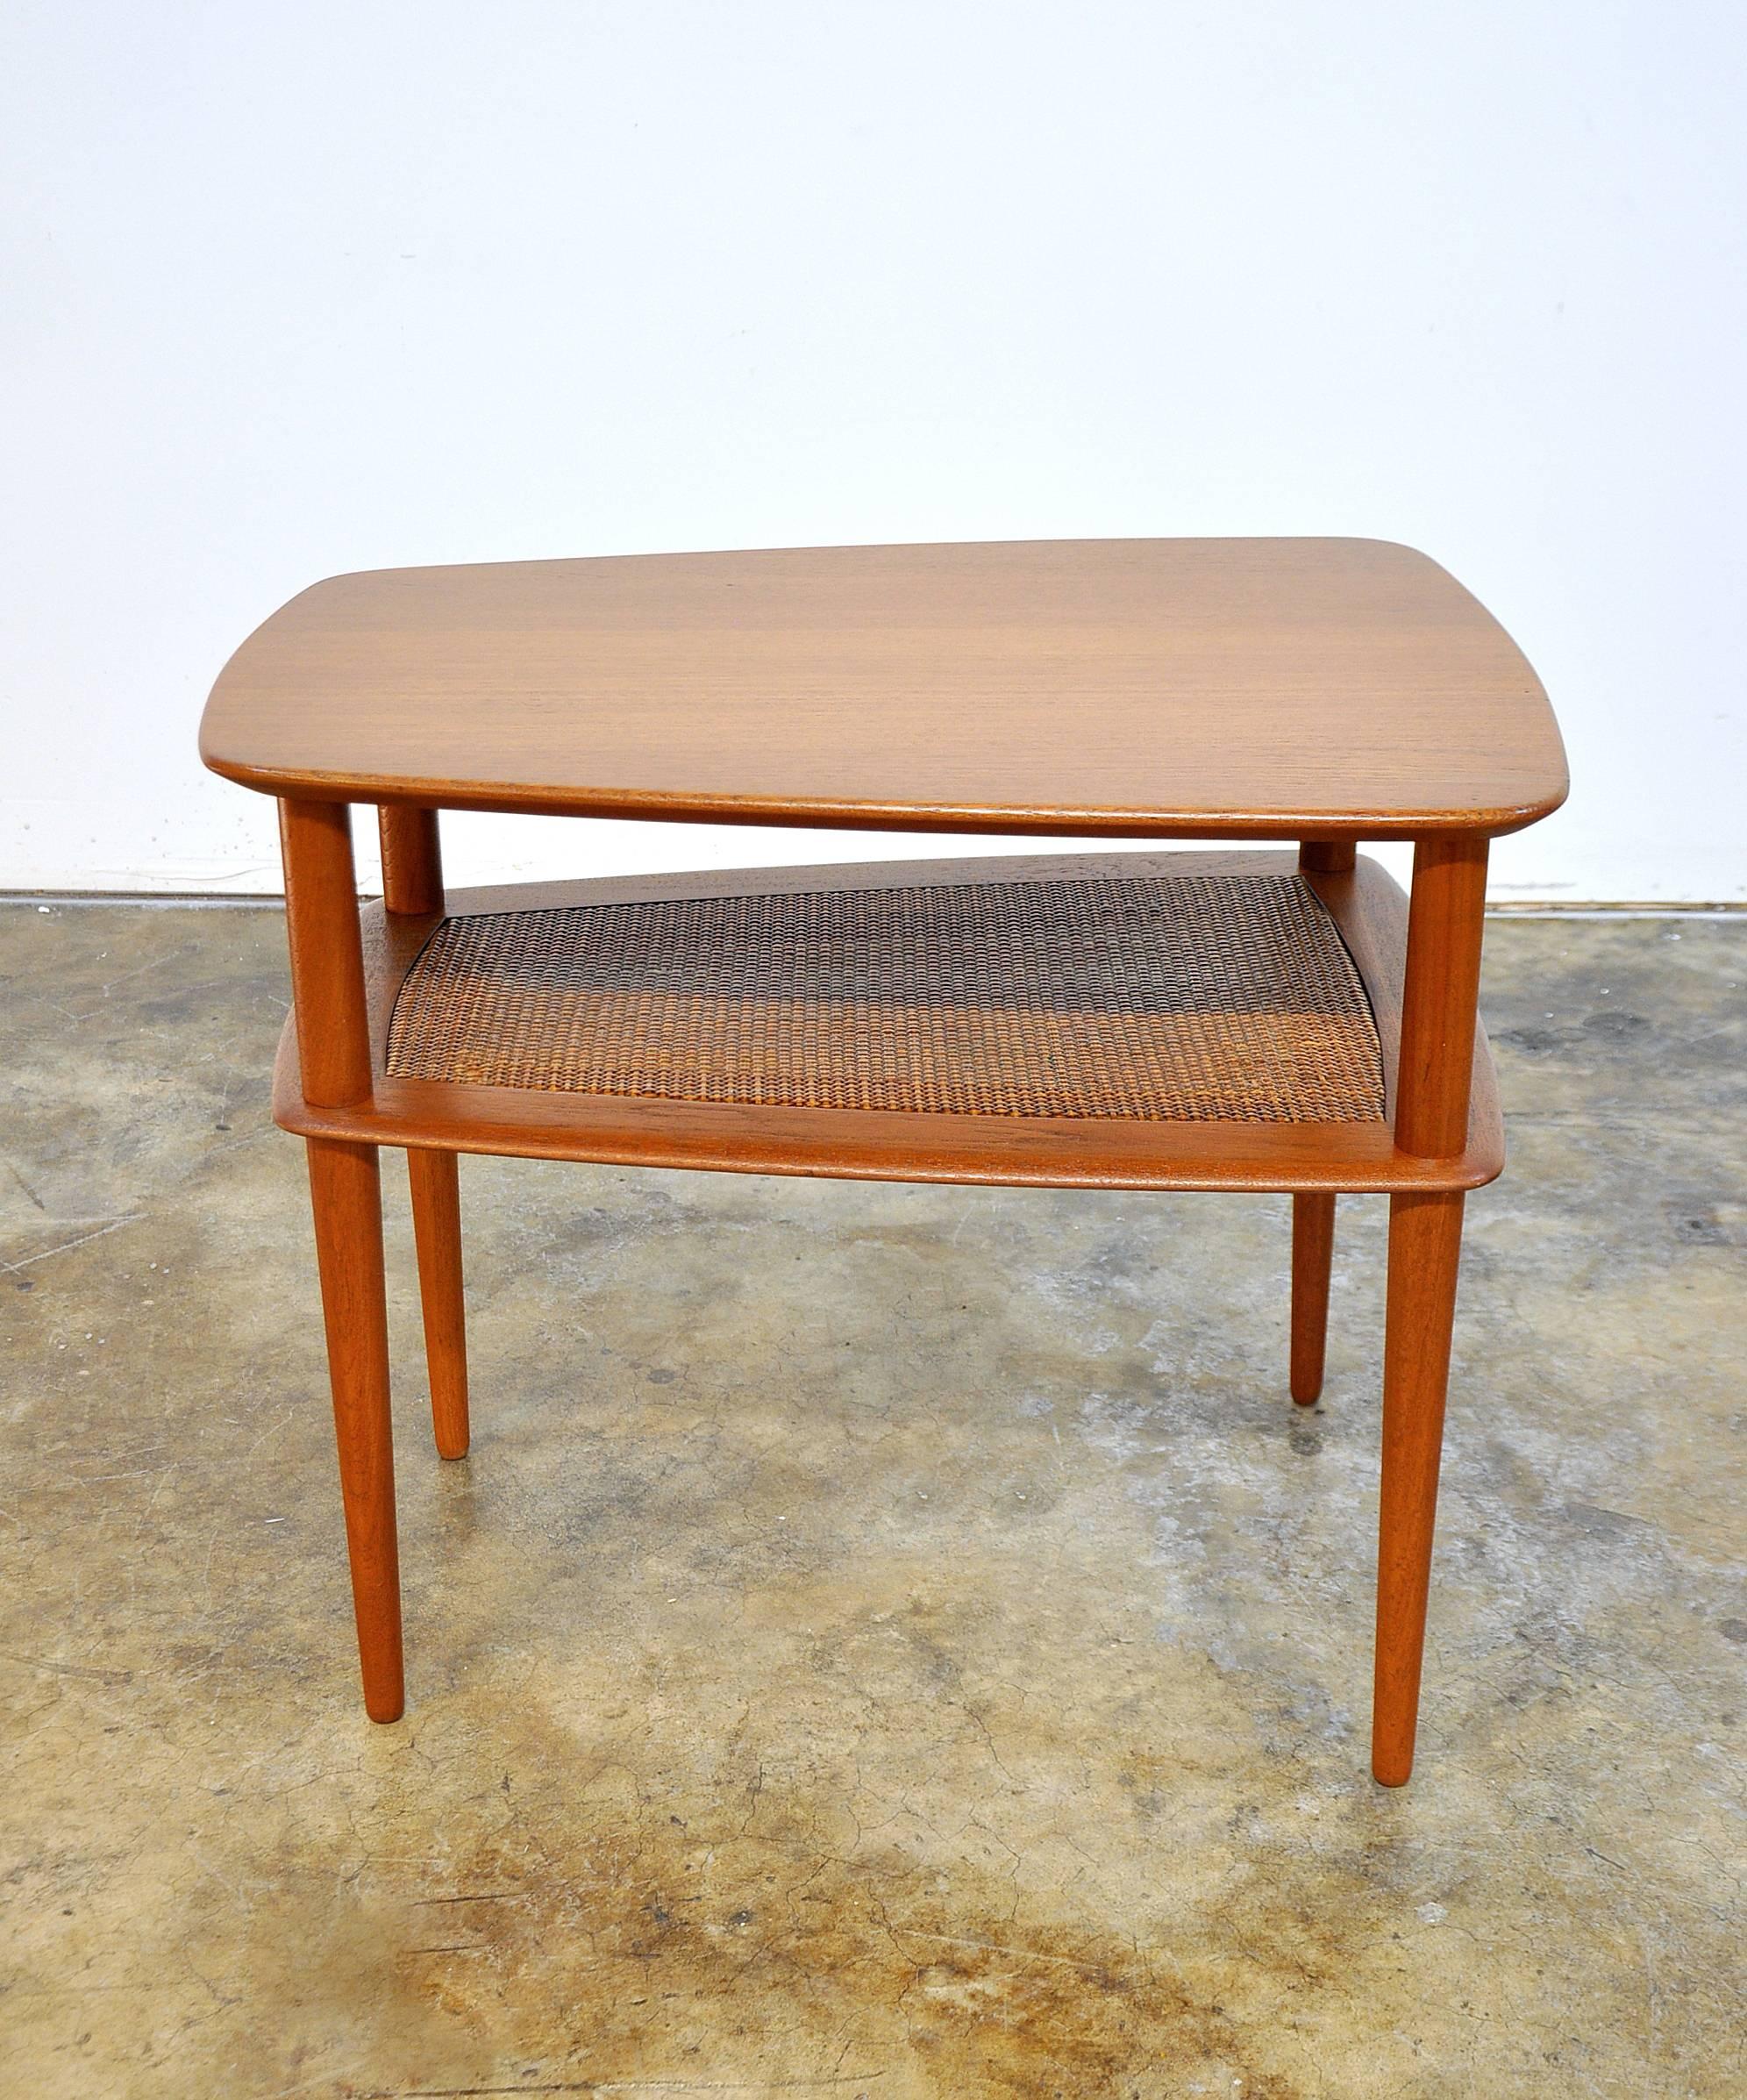 Vintage Danish two-tiered solid teak end table with caned shelf. The table's classic Mid-Century design paired with its shape and size make it so versatile it can be used virtually anywhere. Beautifully grained teakwood. The top features a boat